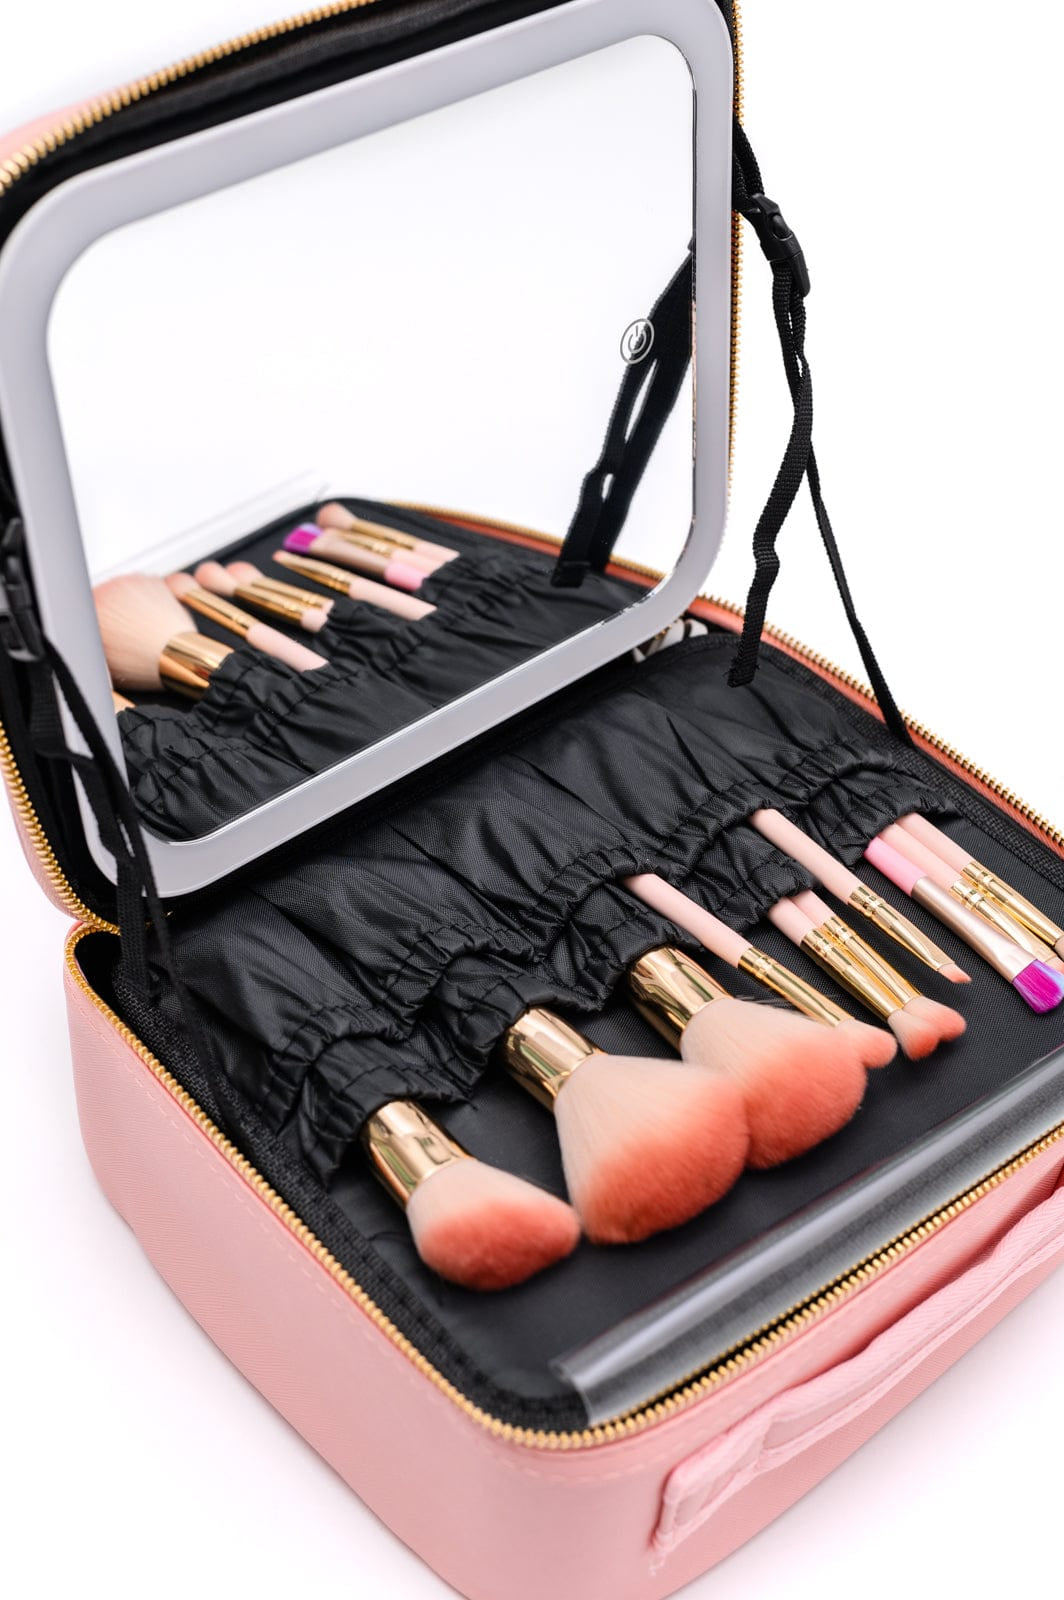 She's All That LED Makeup Case in Pink-Womens-Stay Foxy Boutique, Florissant, Missouri